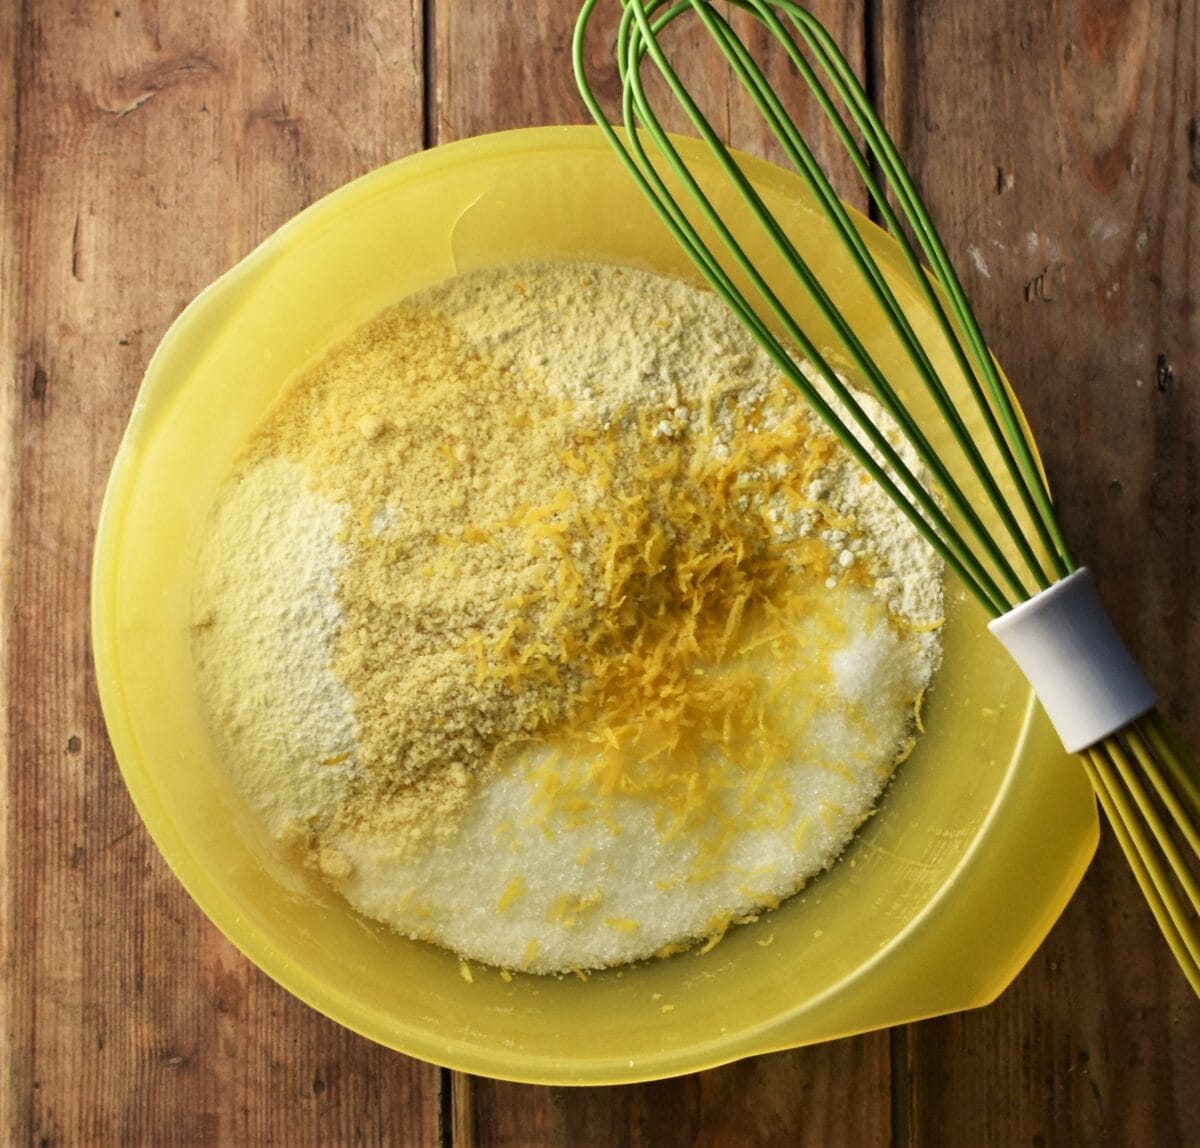 Flour mixture and lemon zest in large yellow bowl with green whisk on top.